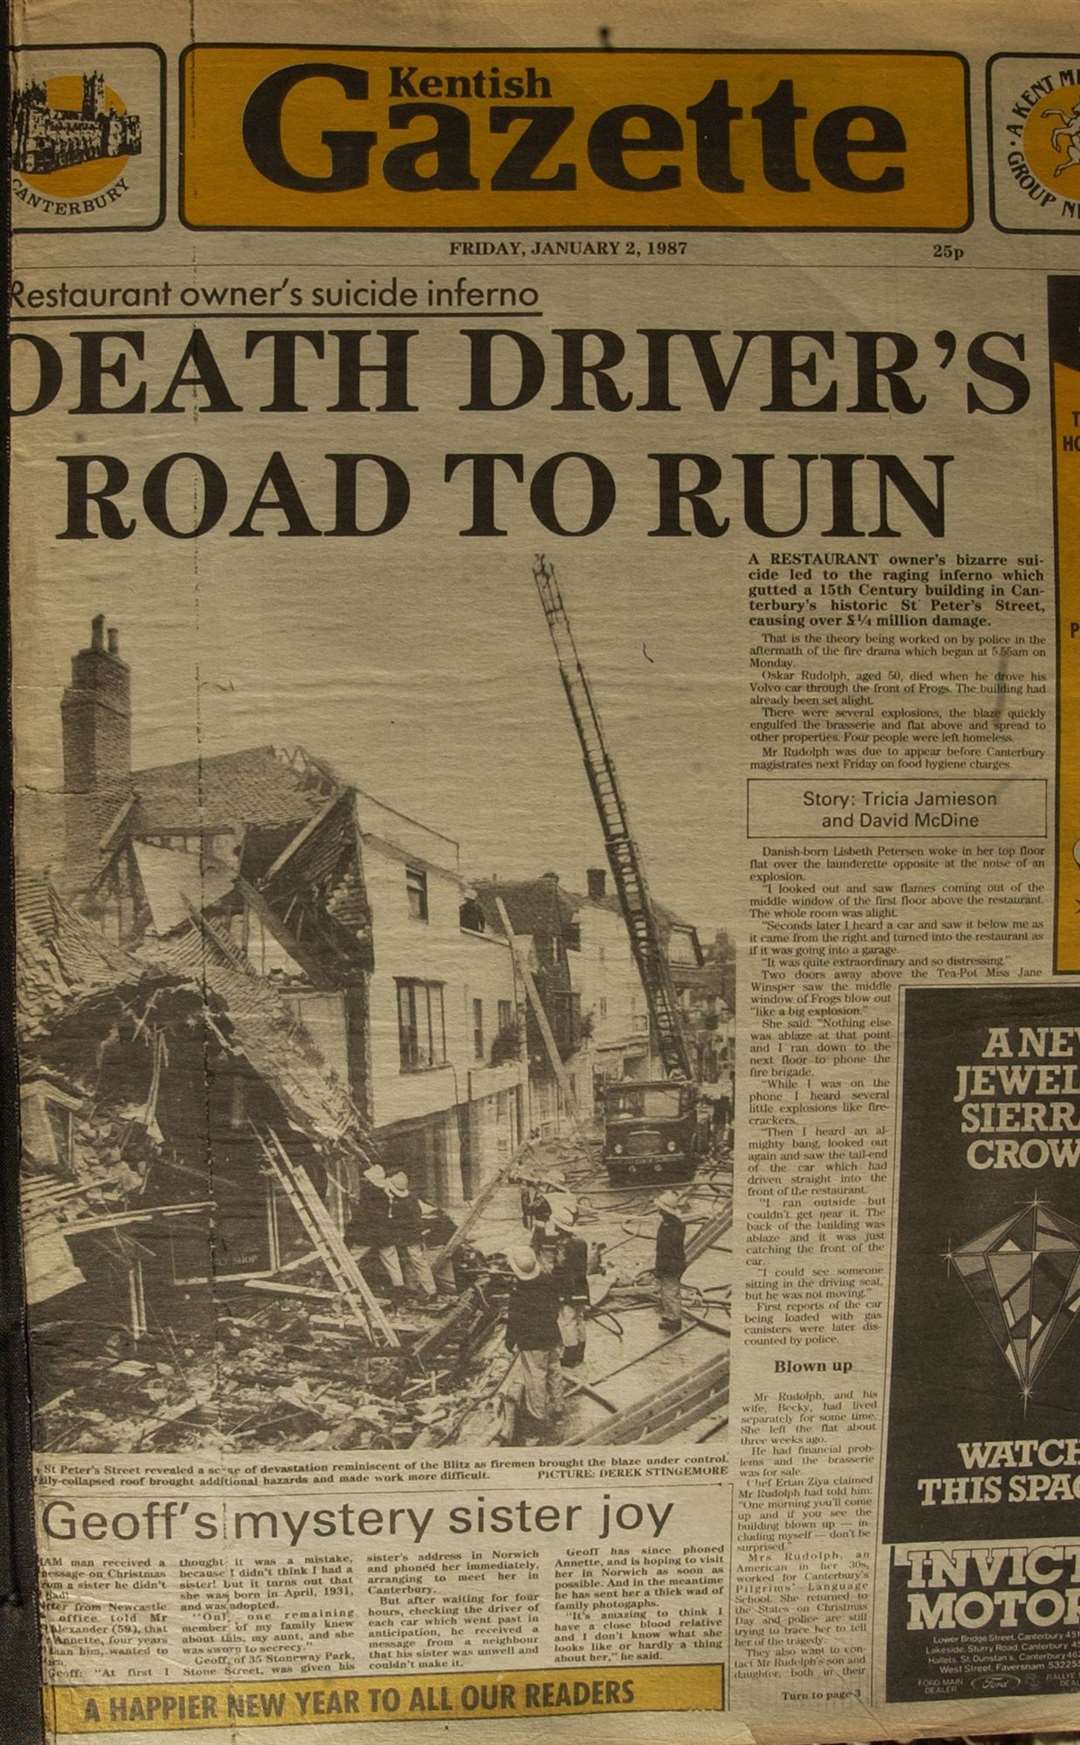 The Kentish Gazette front page on January 2, 1987